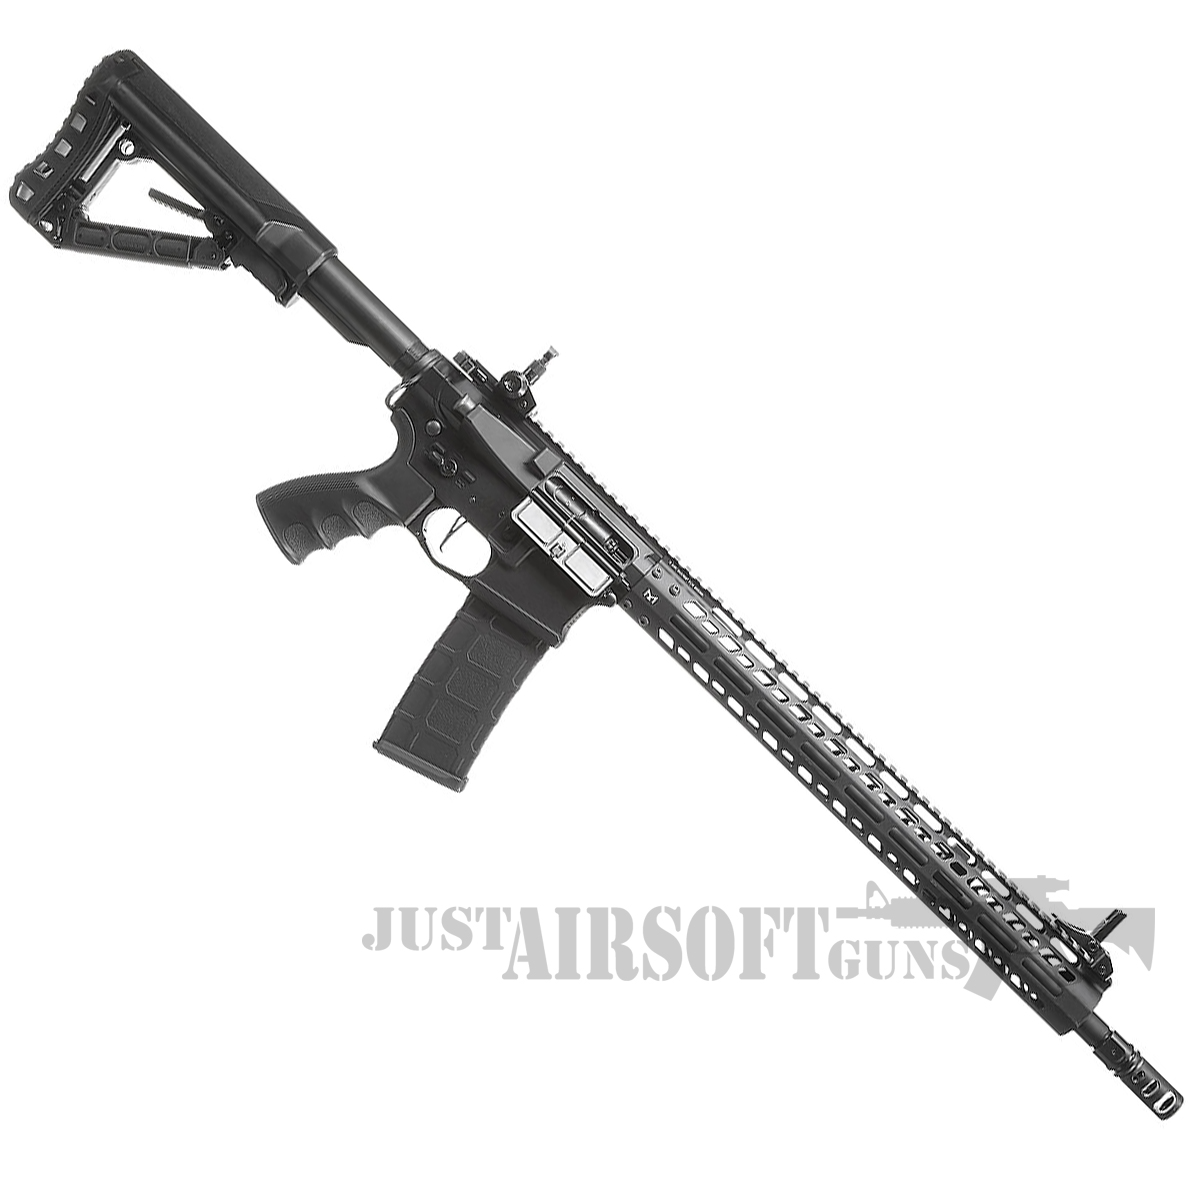 G&G TR16 MBR 556WH Full Metal Airsoft AEG with MLOK Handguard 